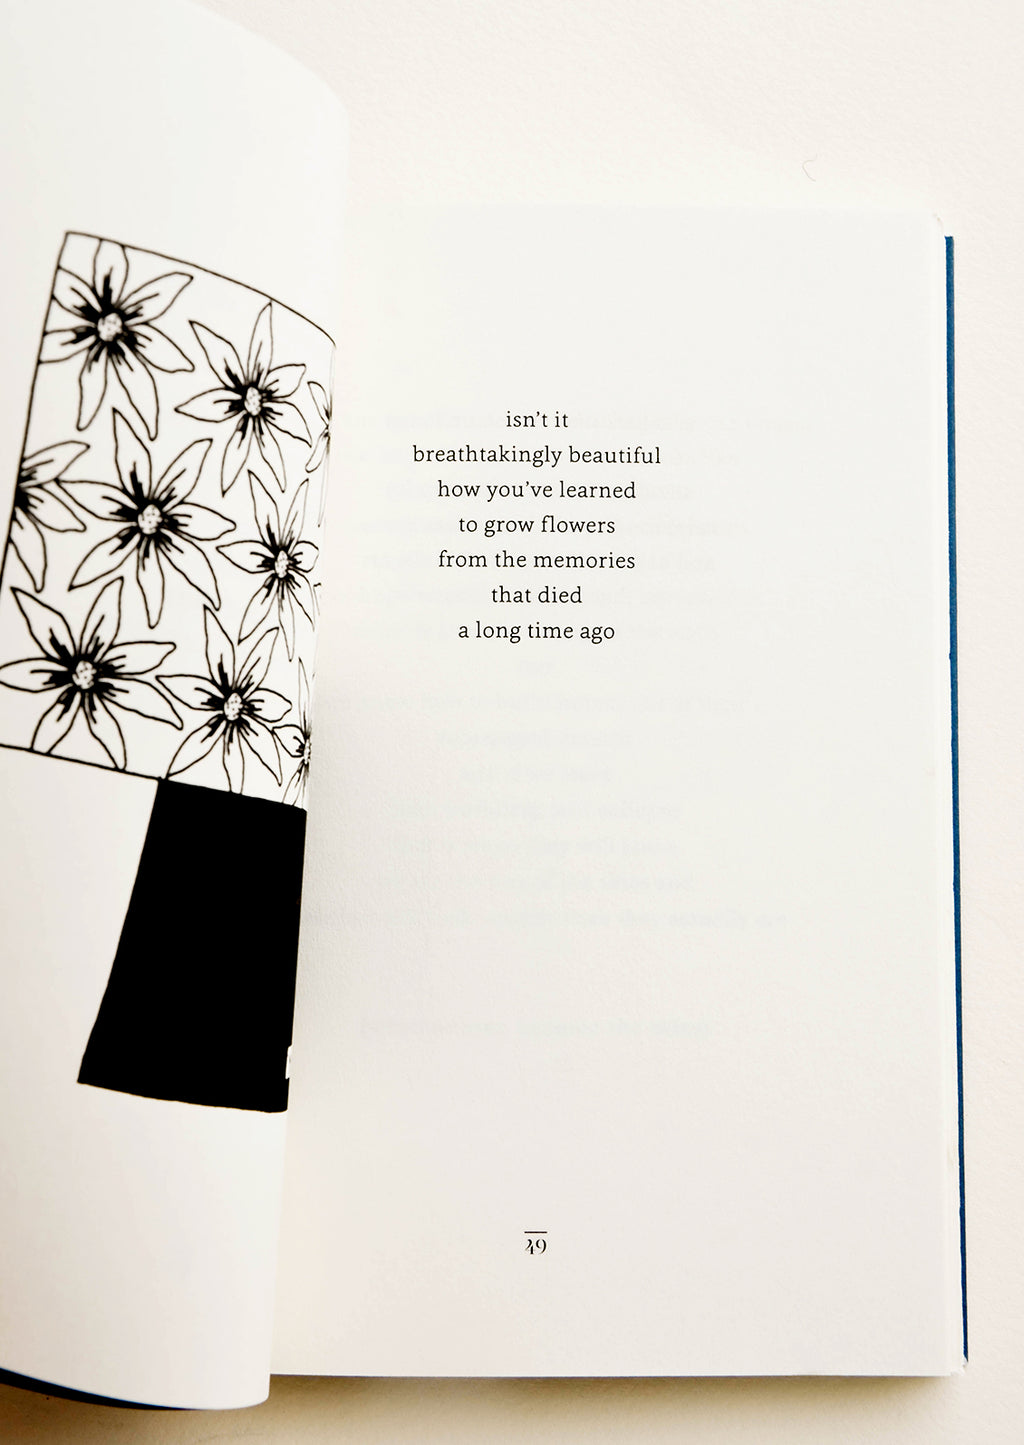 2: Inside pages of a softcover poetry book featuring a mix of illustrations and short poems